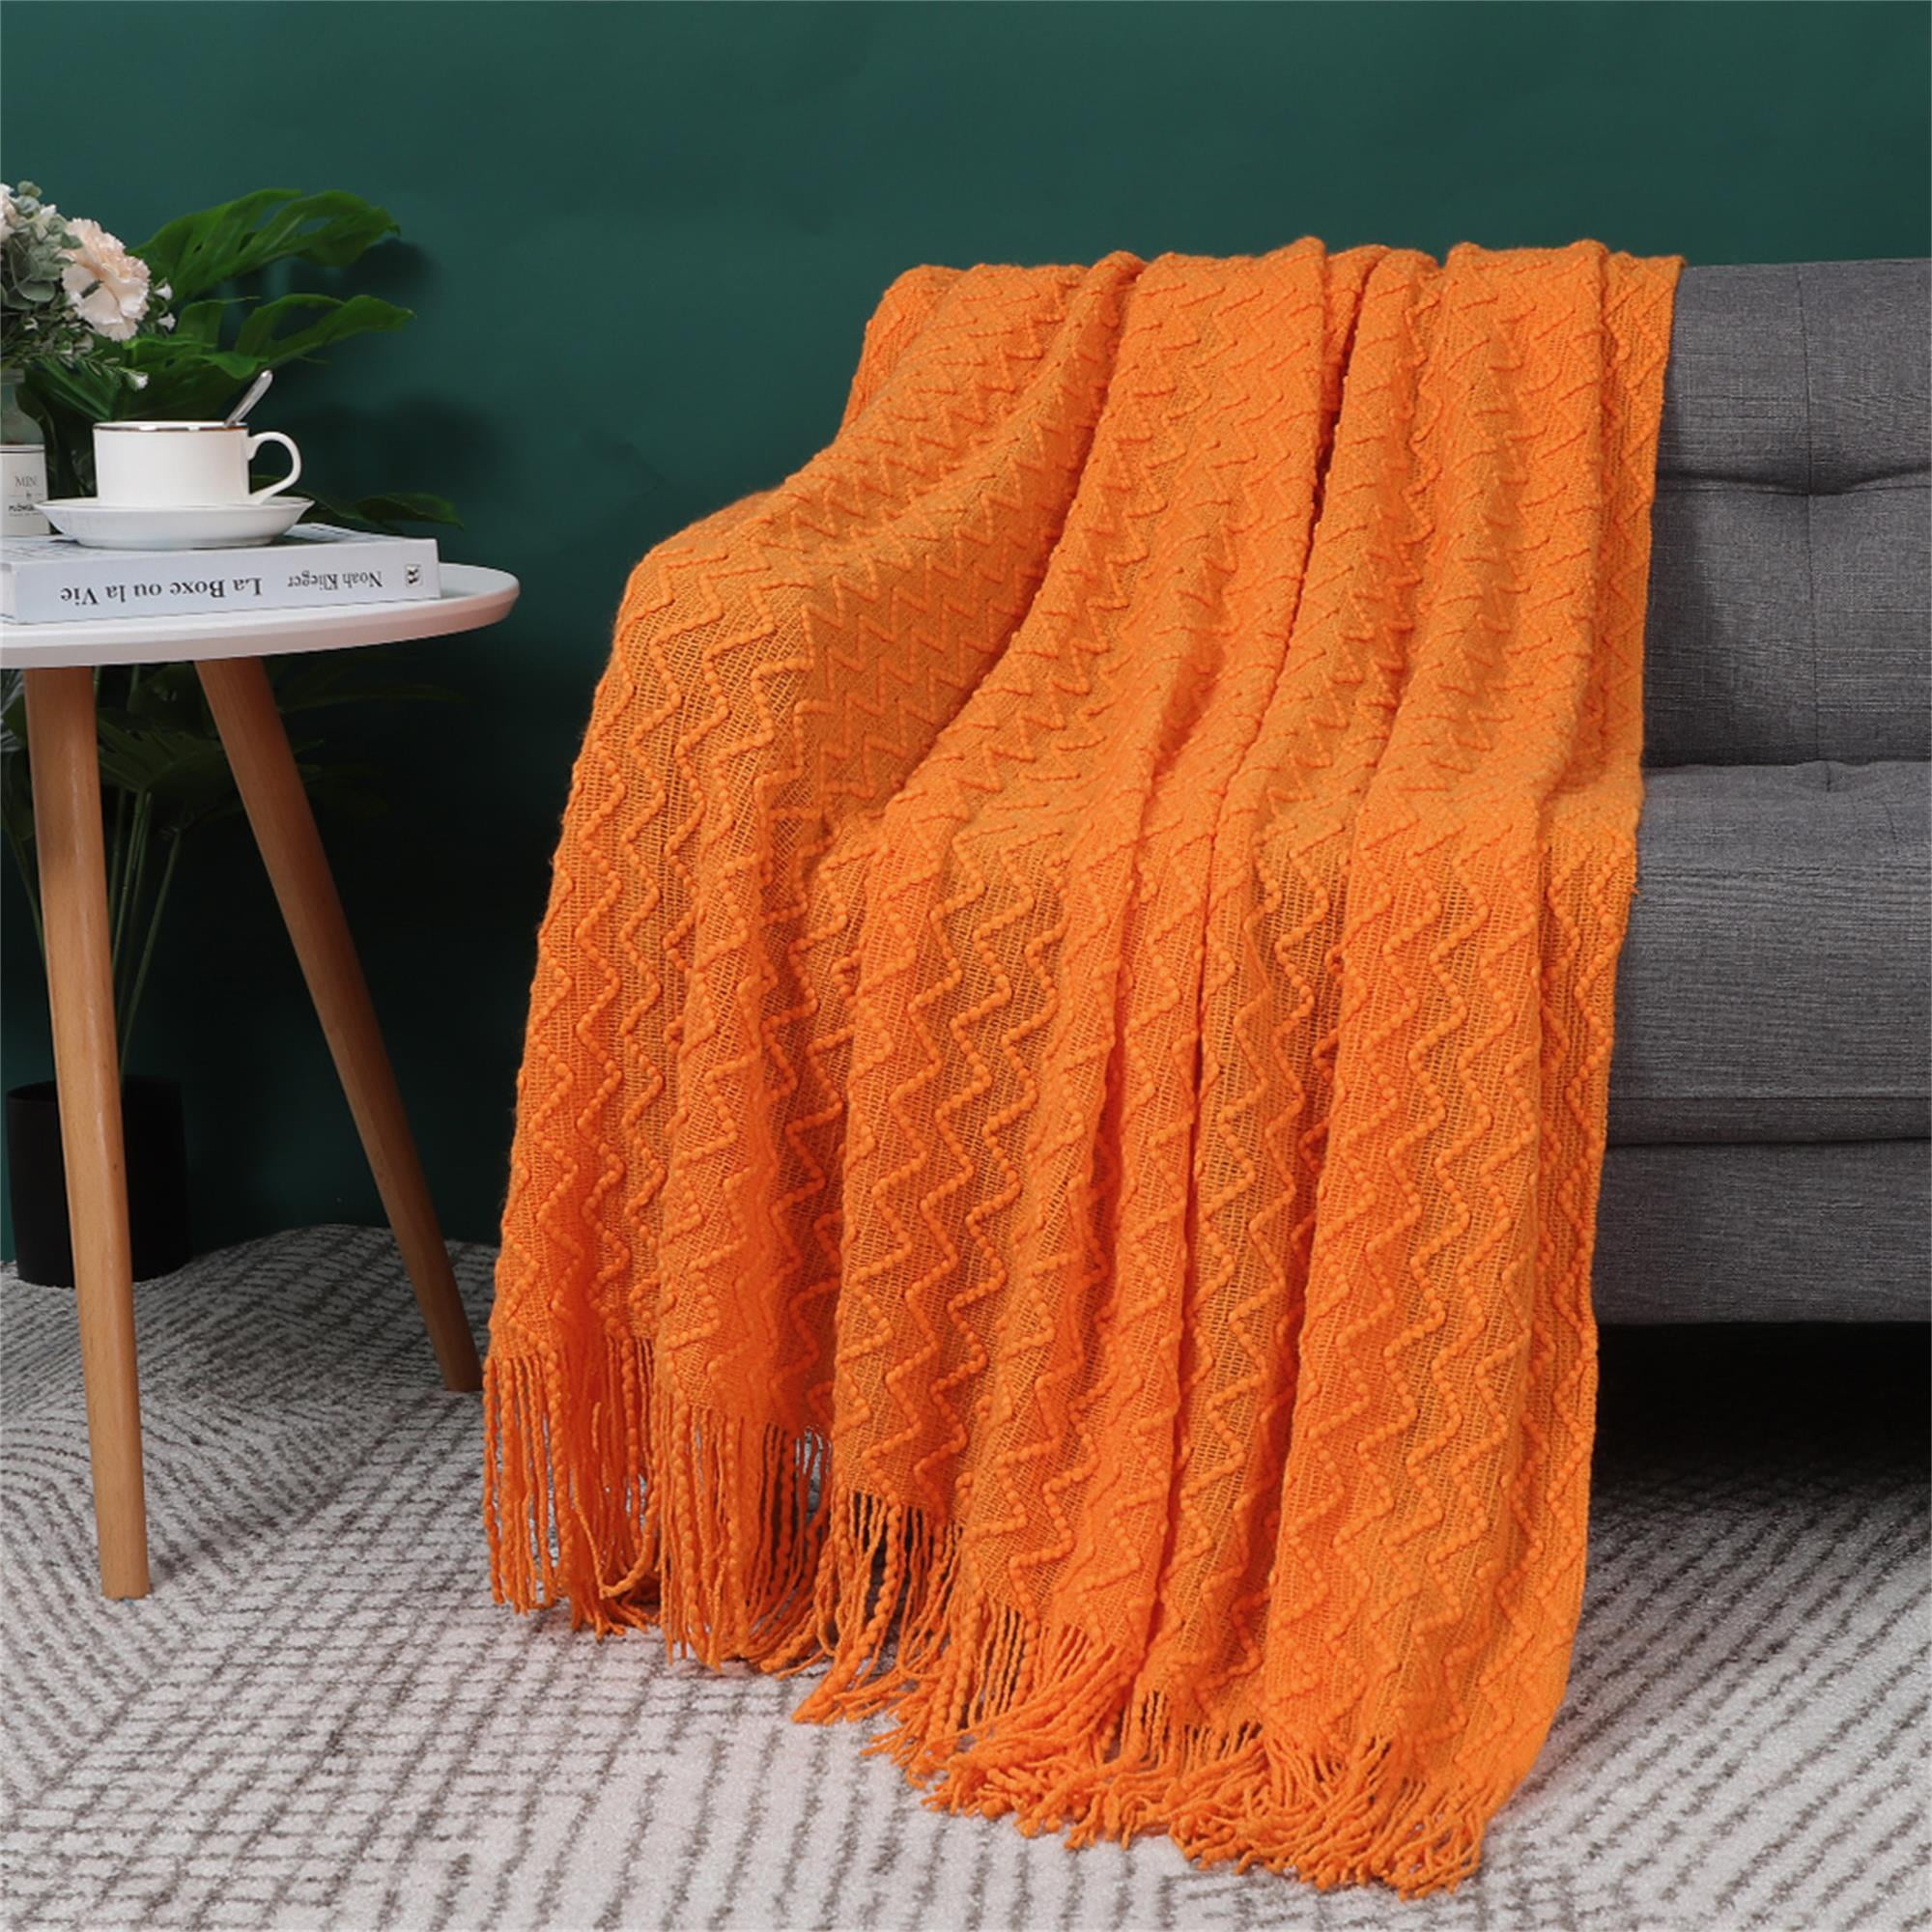 Home Travel Suitable for All Seasons Navy Lightweight Soft Cozy Decorative Woven Blanket with Tassels for Couch Chair Bed Sofa PHF Acrylic Knit Throw Blanket 50 x 60 inches 